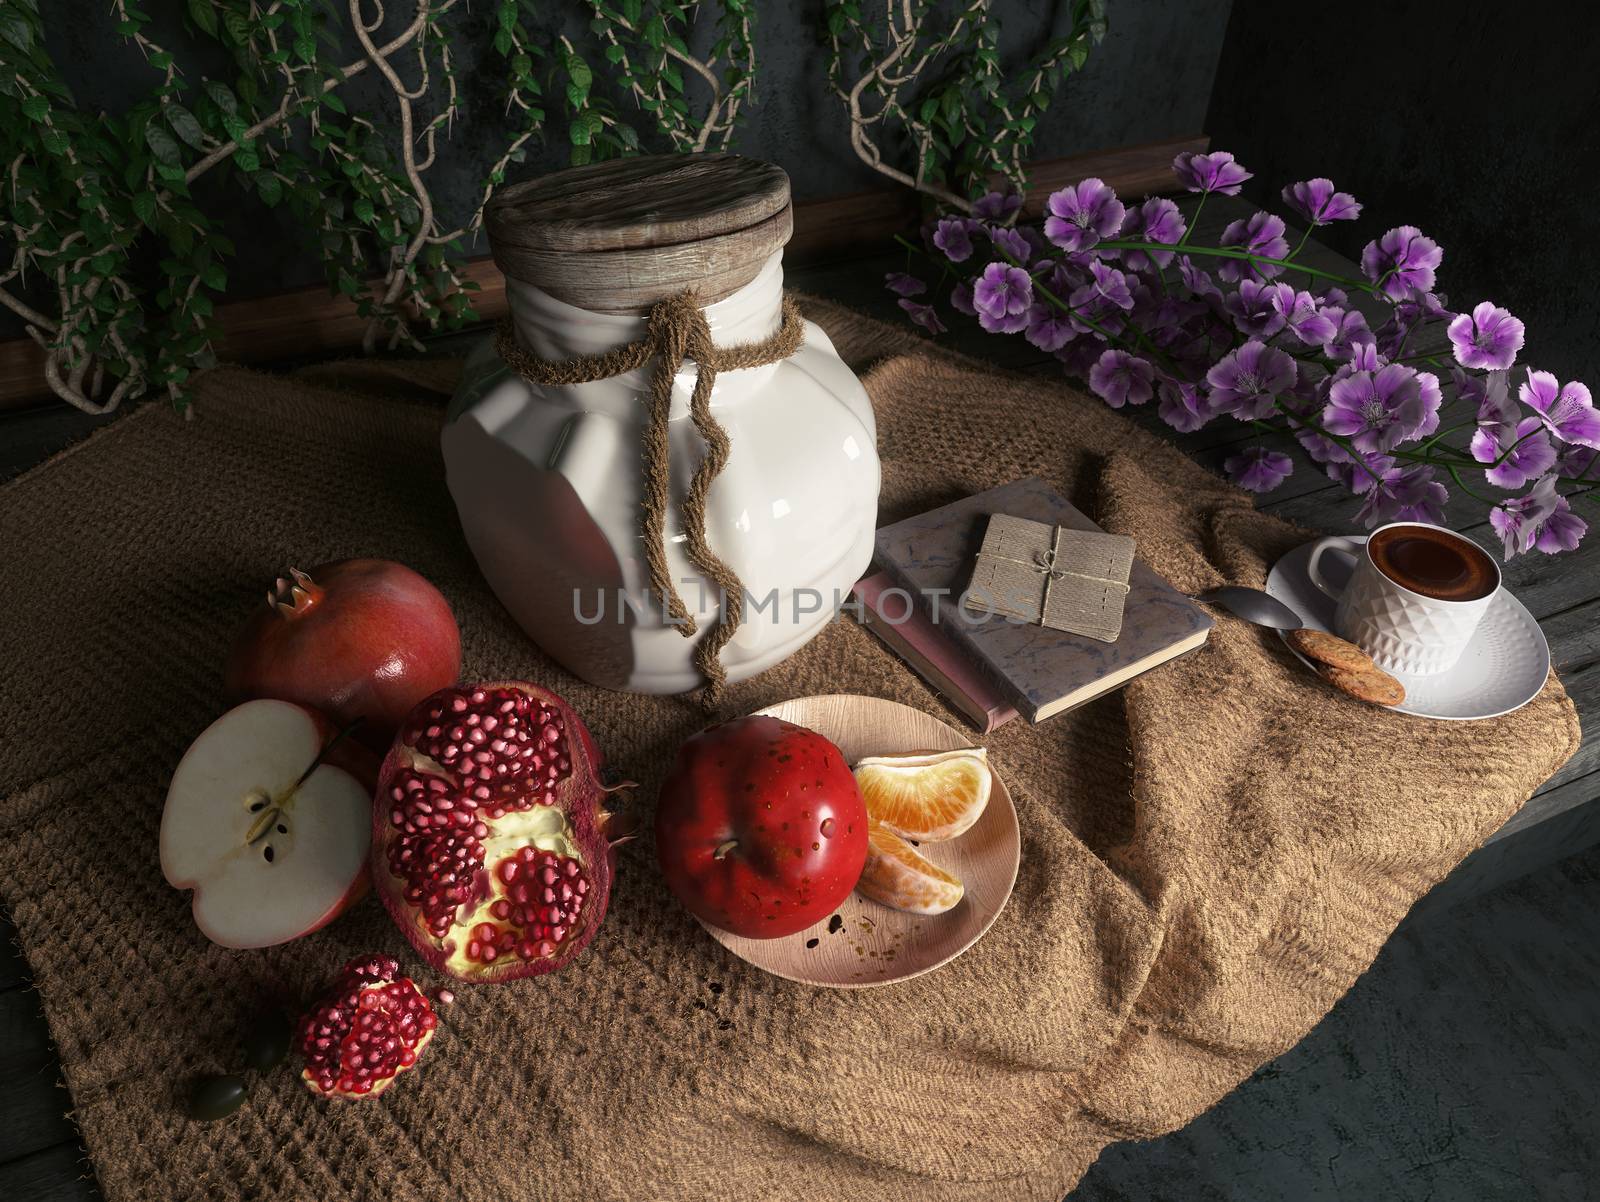 jar,apples,pomegranate,coffe cup with books and orange on canvas drapery conceptual still-life